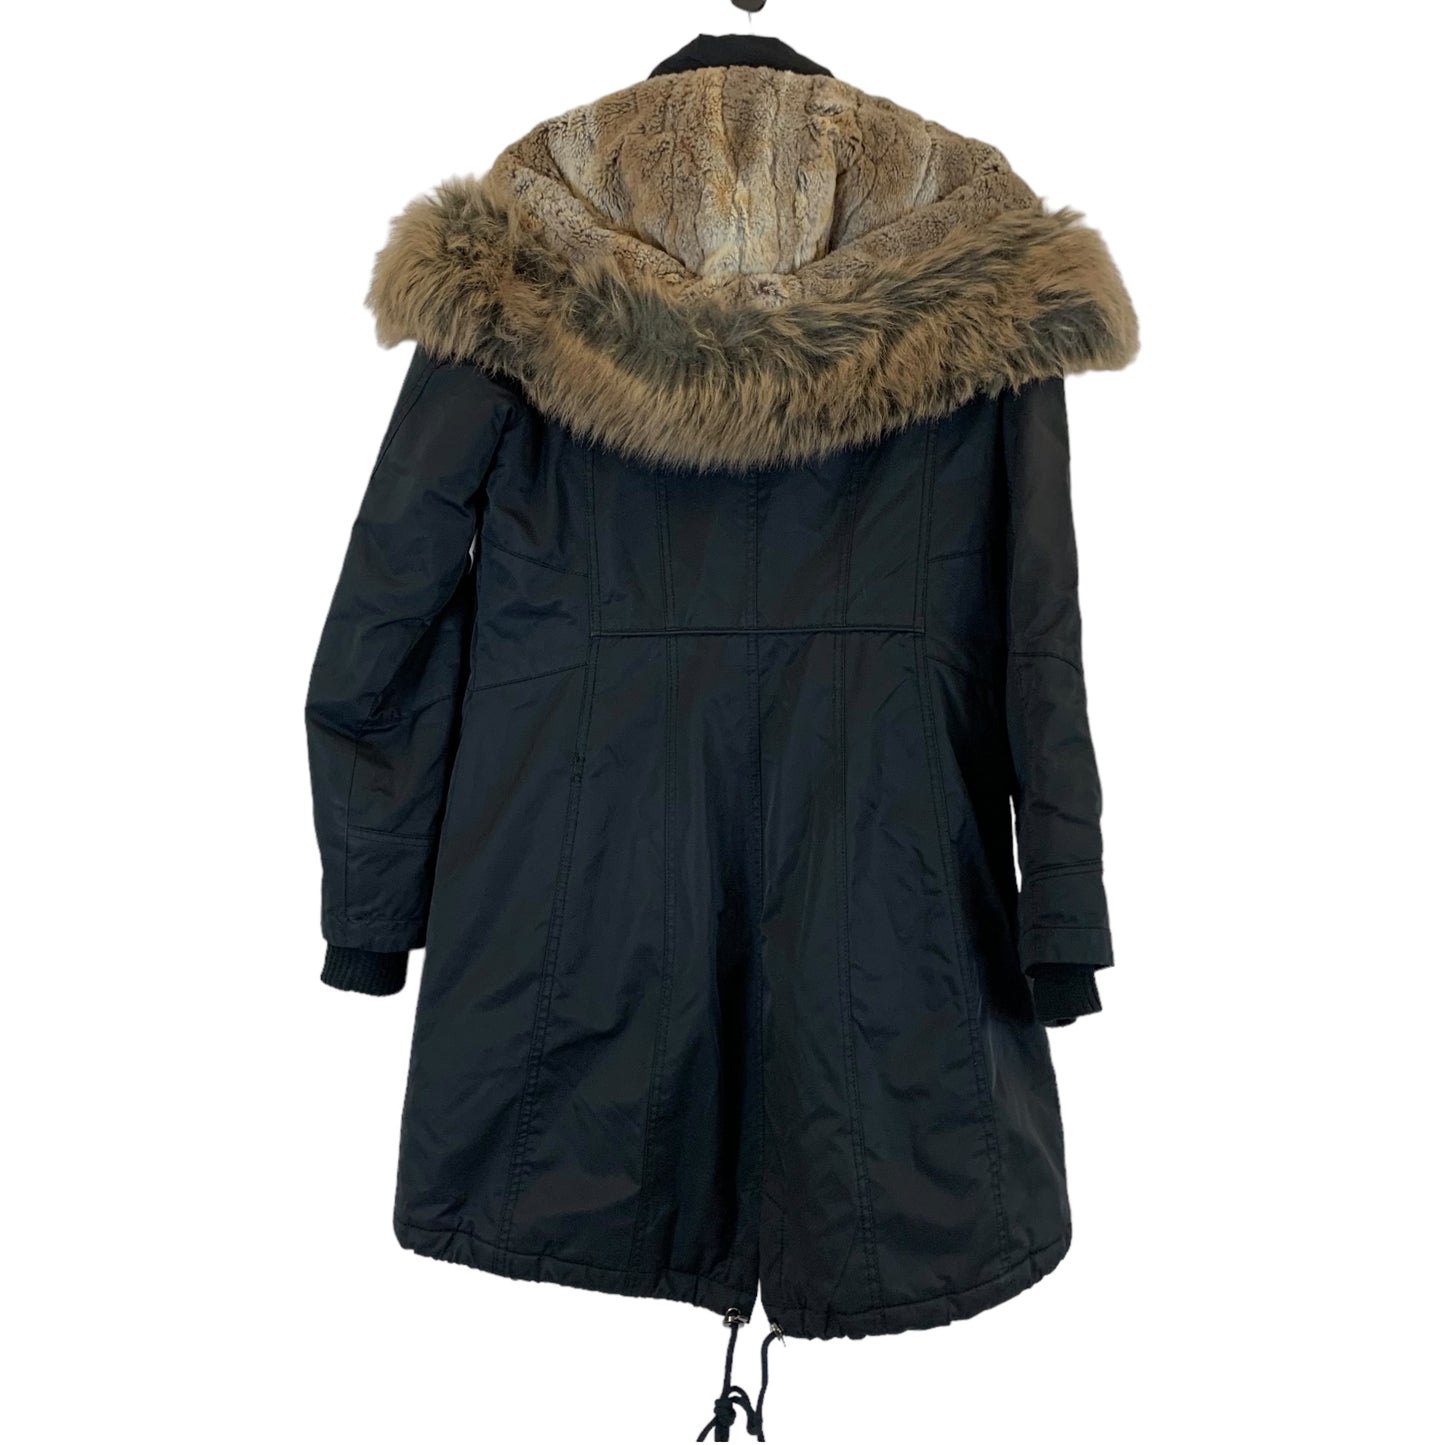 Coat Other By Madison Expedition Size: S